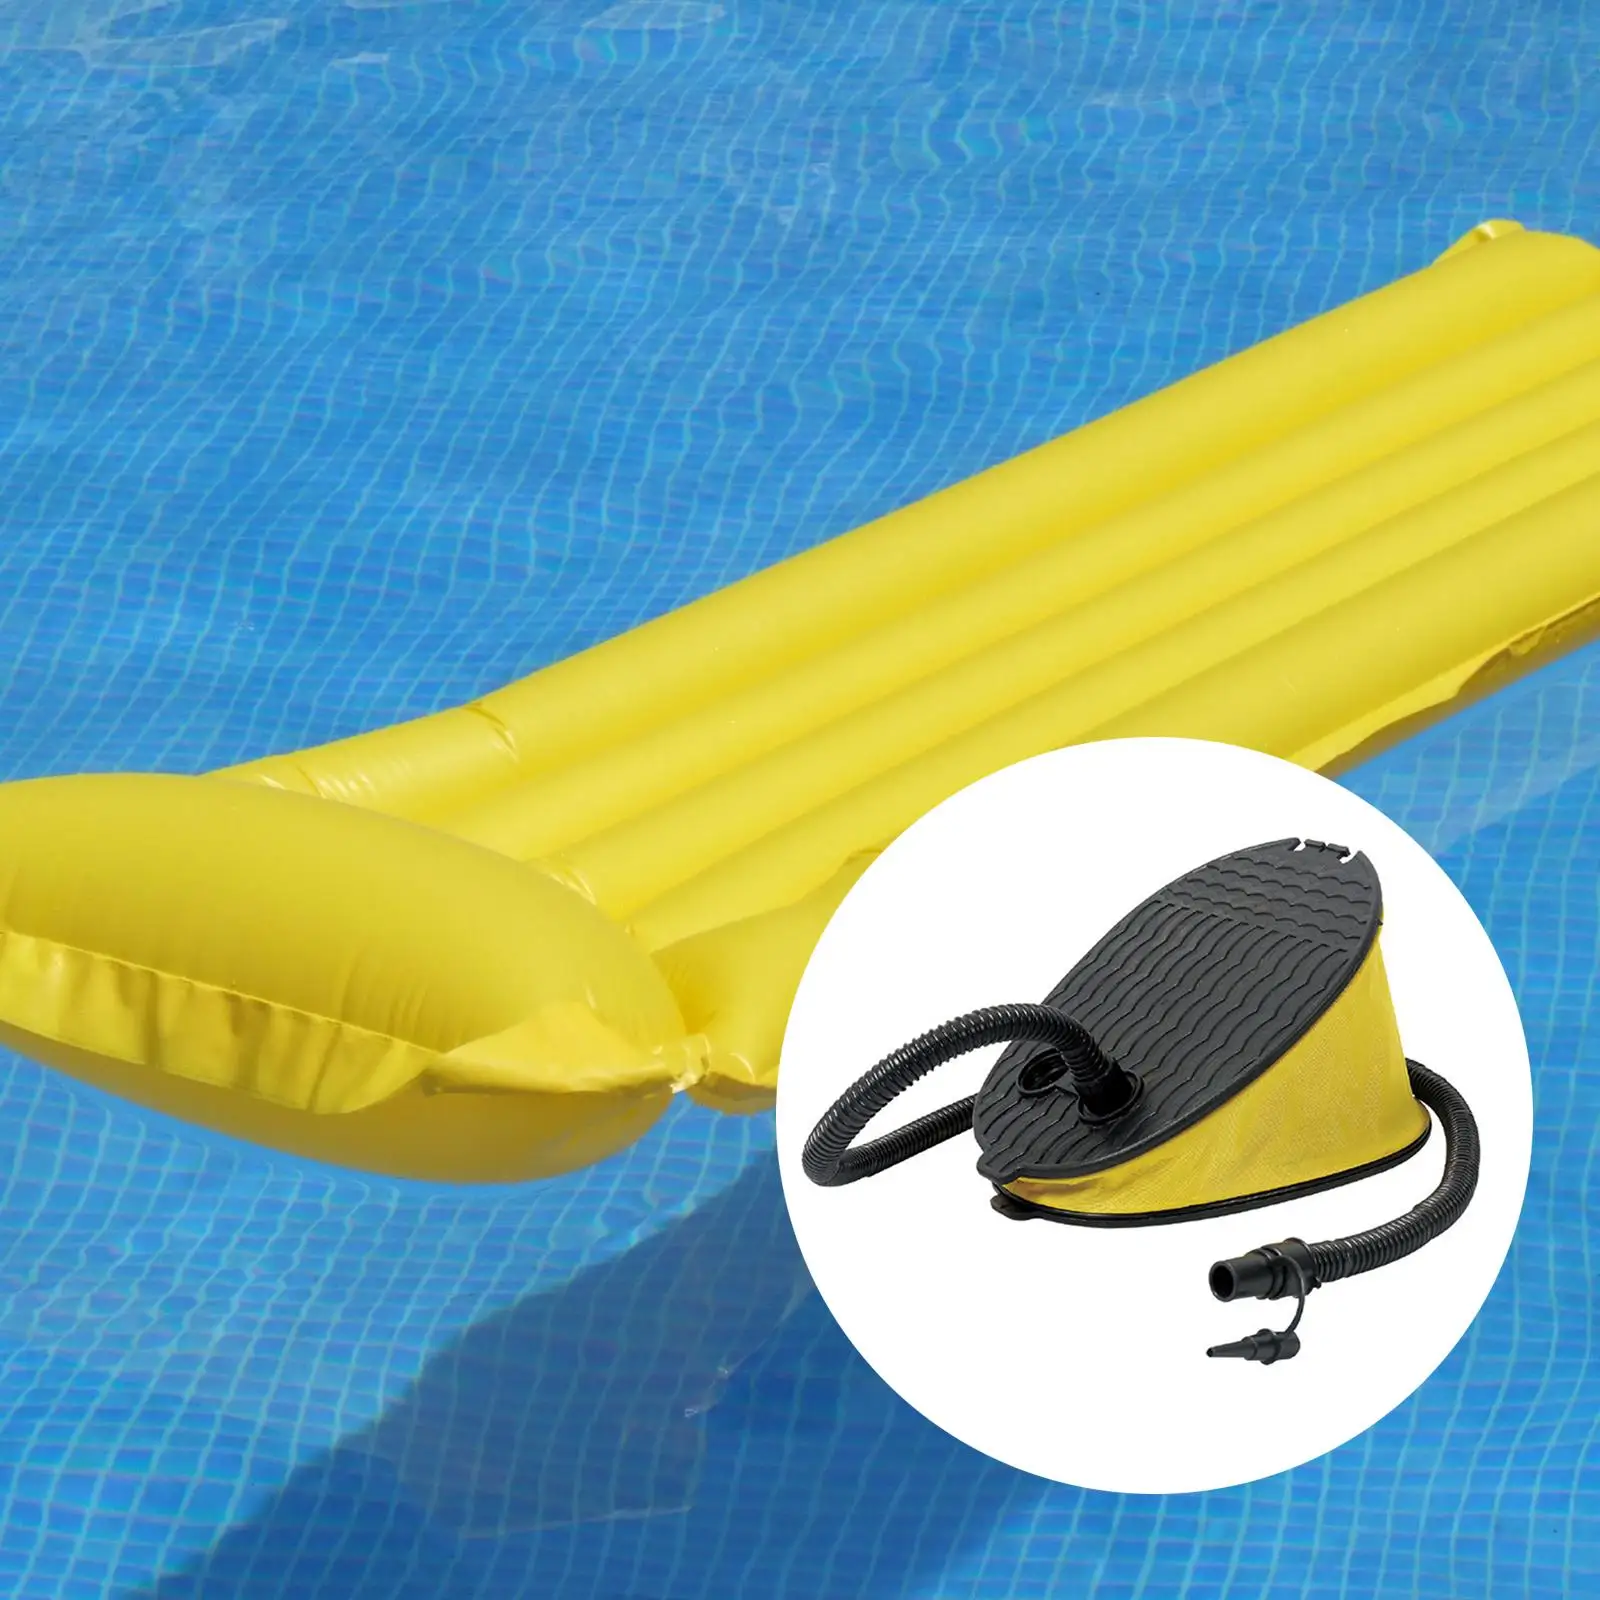 Foot Pump Air Pump for Inflatable Boat Water Floats Air Mattress Bed Sports Camping